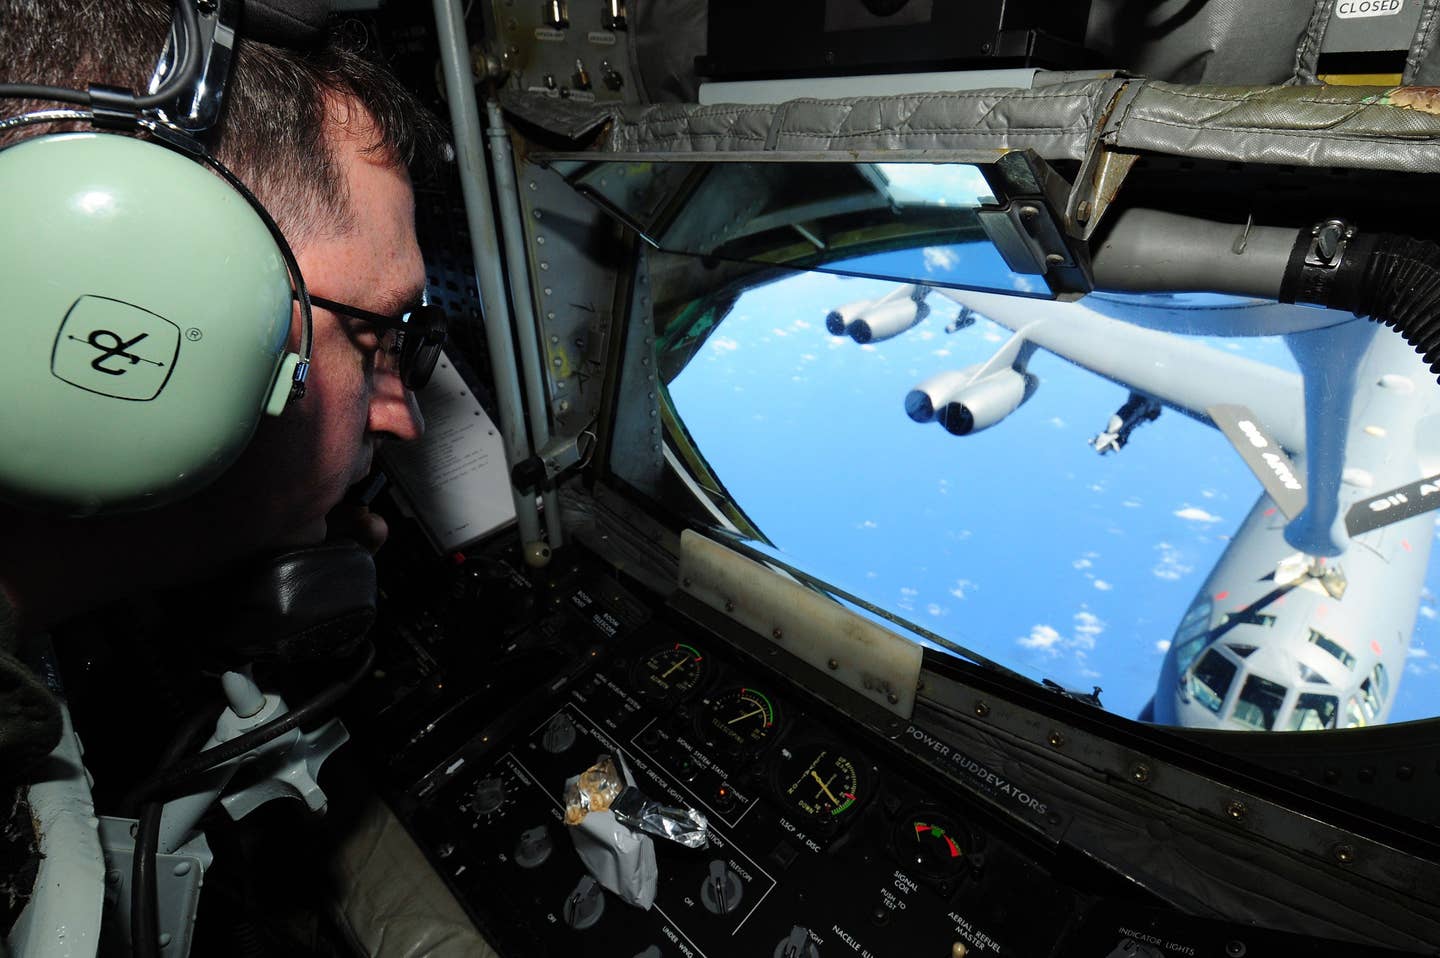 SEYMOUR JOHNSON AIR FORCE BASE, N.C. -- A member of the 916th Air Refueling Wing off-loads fuel to a B-52 over the Pacific near Guam.